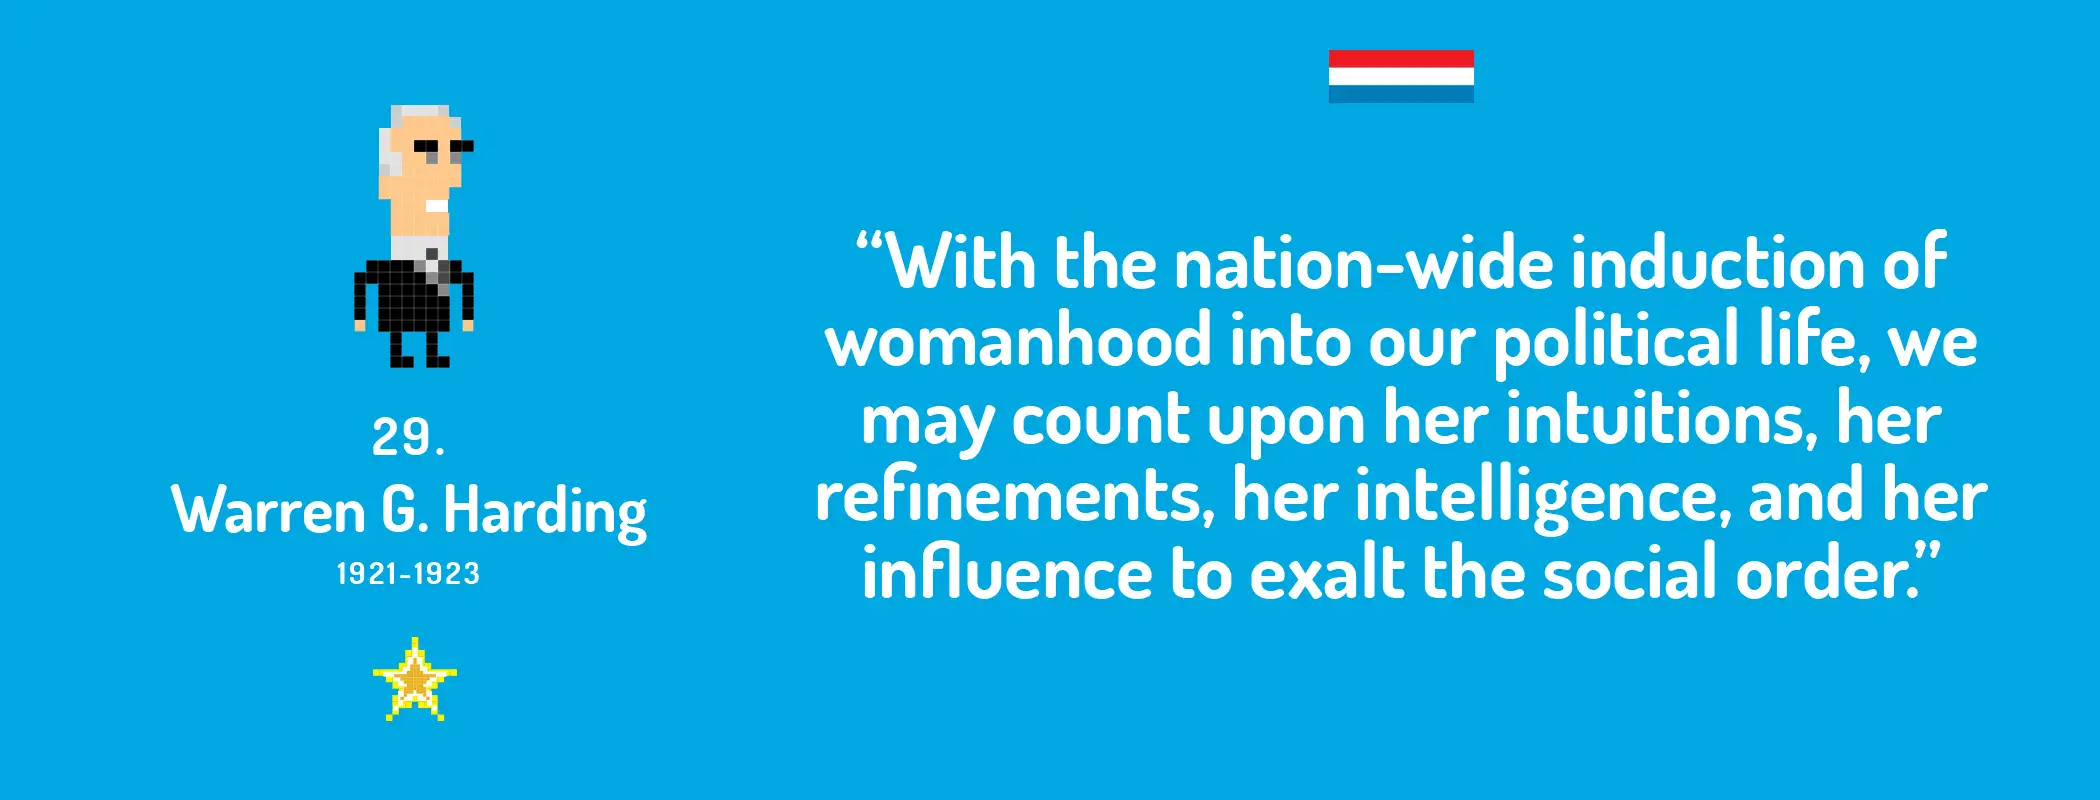 With the nation-wide induction of womanhood into our political life, we may count upon her intuitions, her refinements, her intelligence, and her influence to exalt the social order.